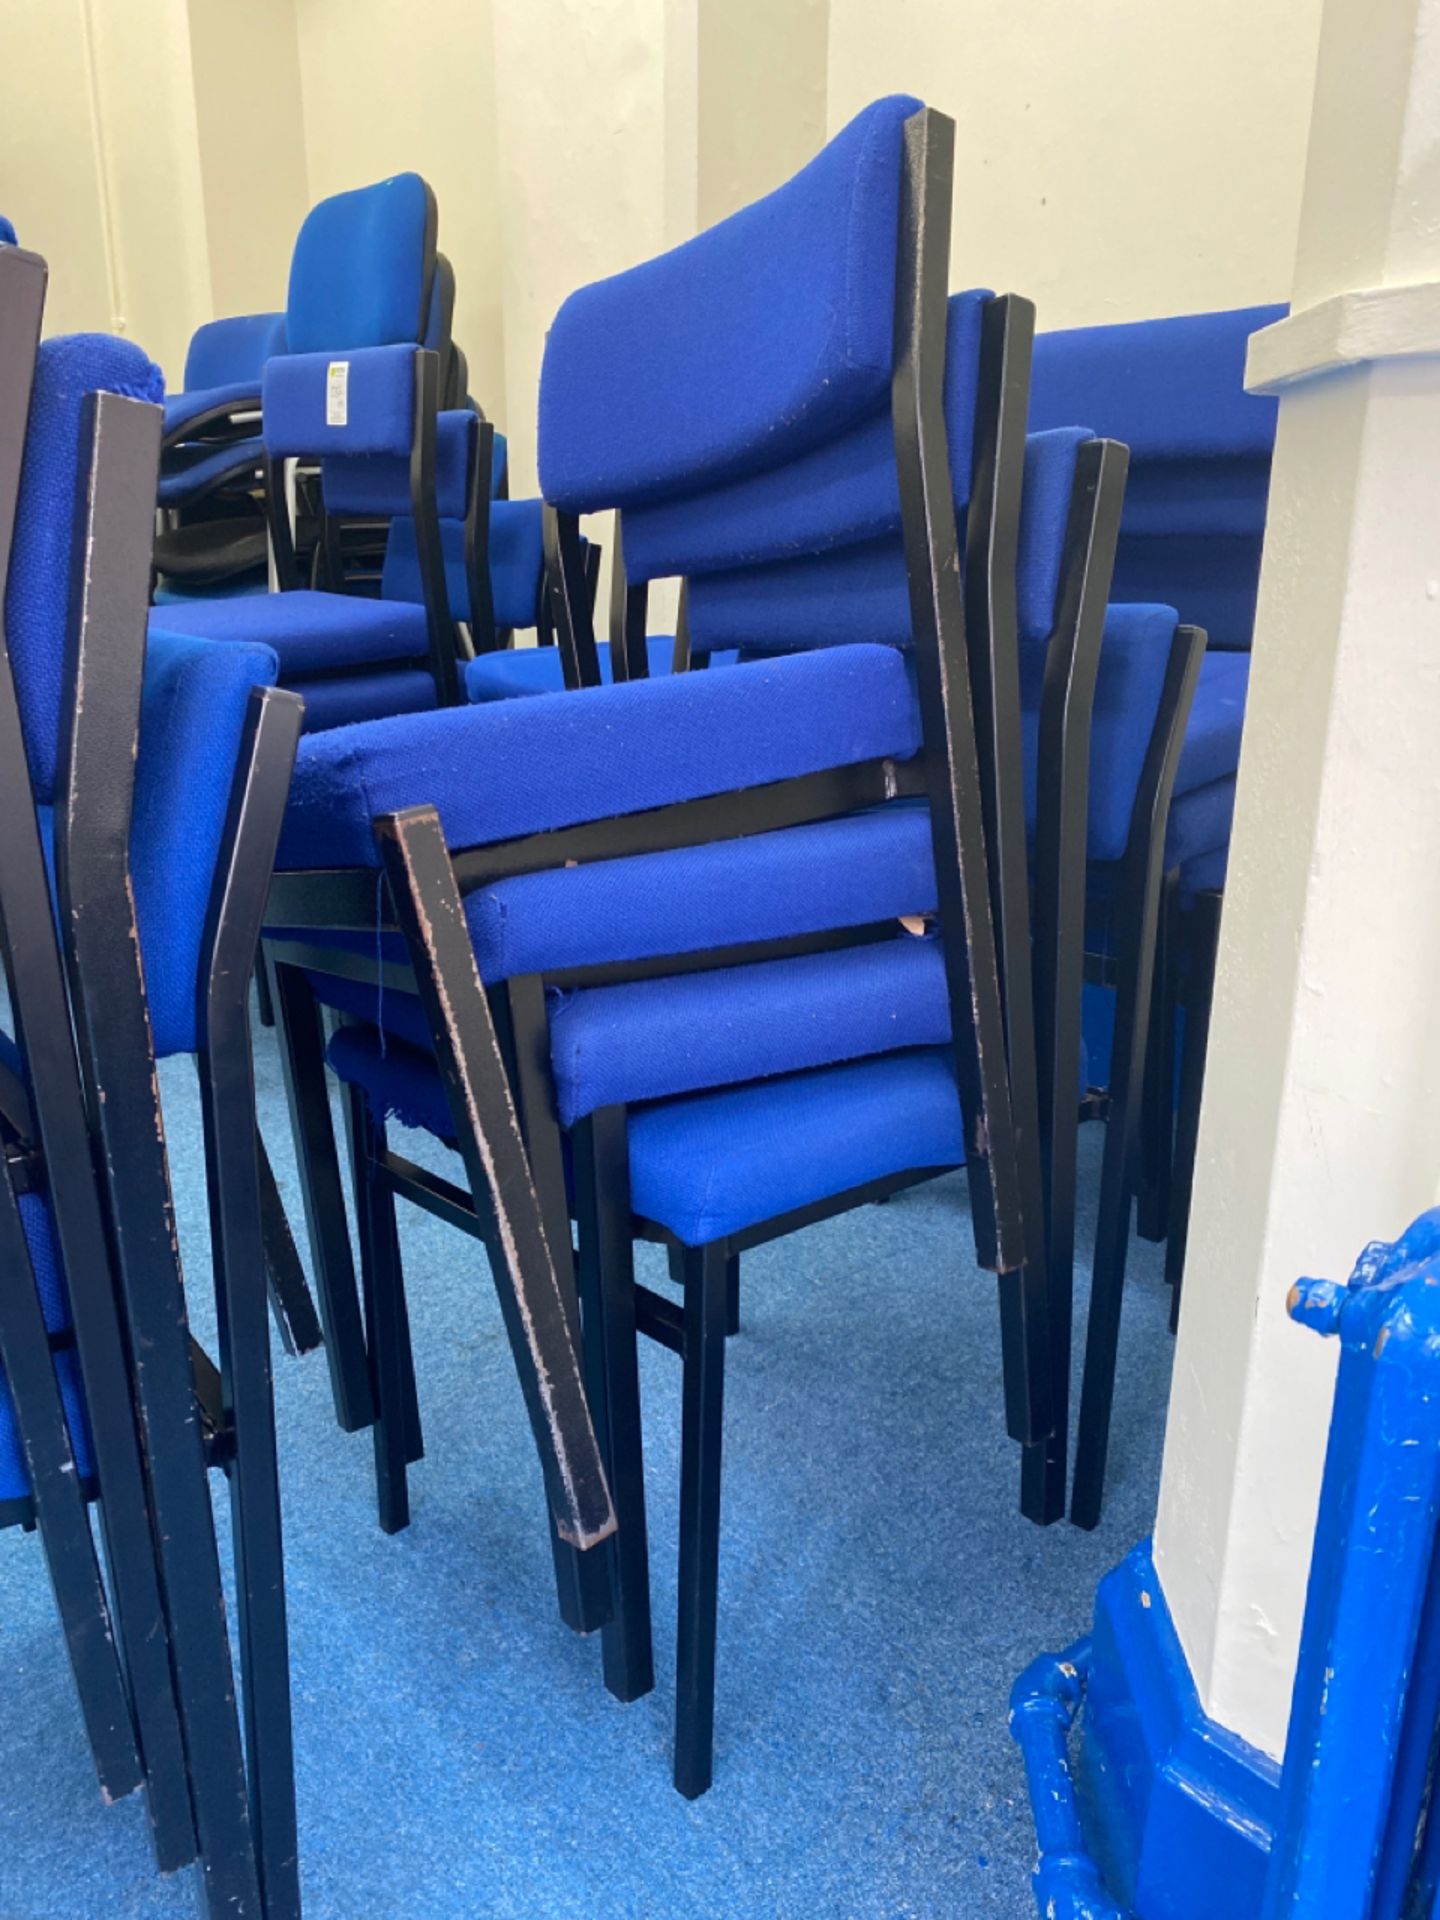 Set of 4 Cusioned Classroom Chairs - Image 12 of 12